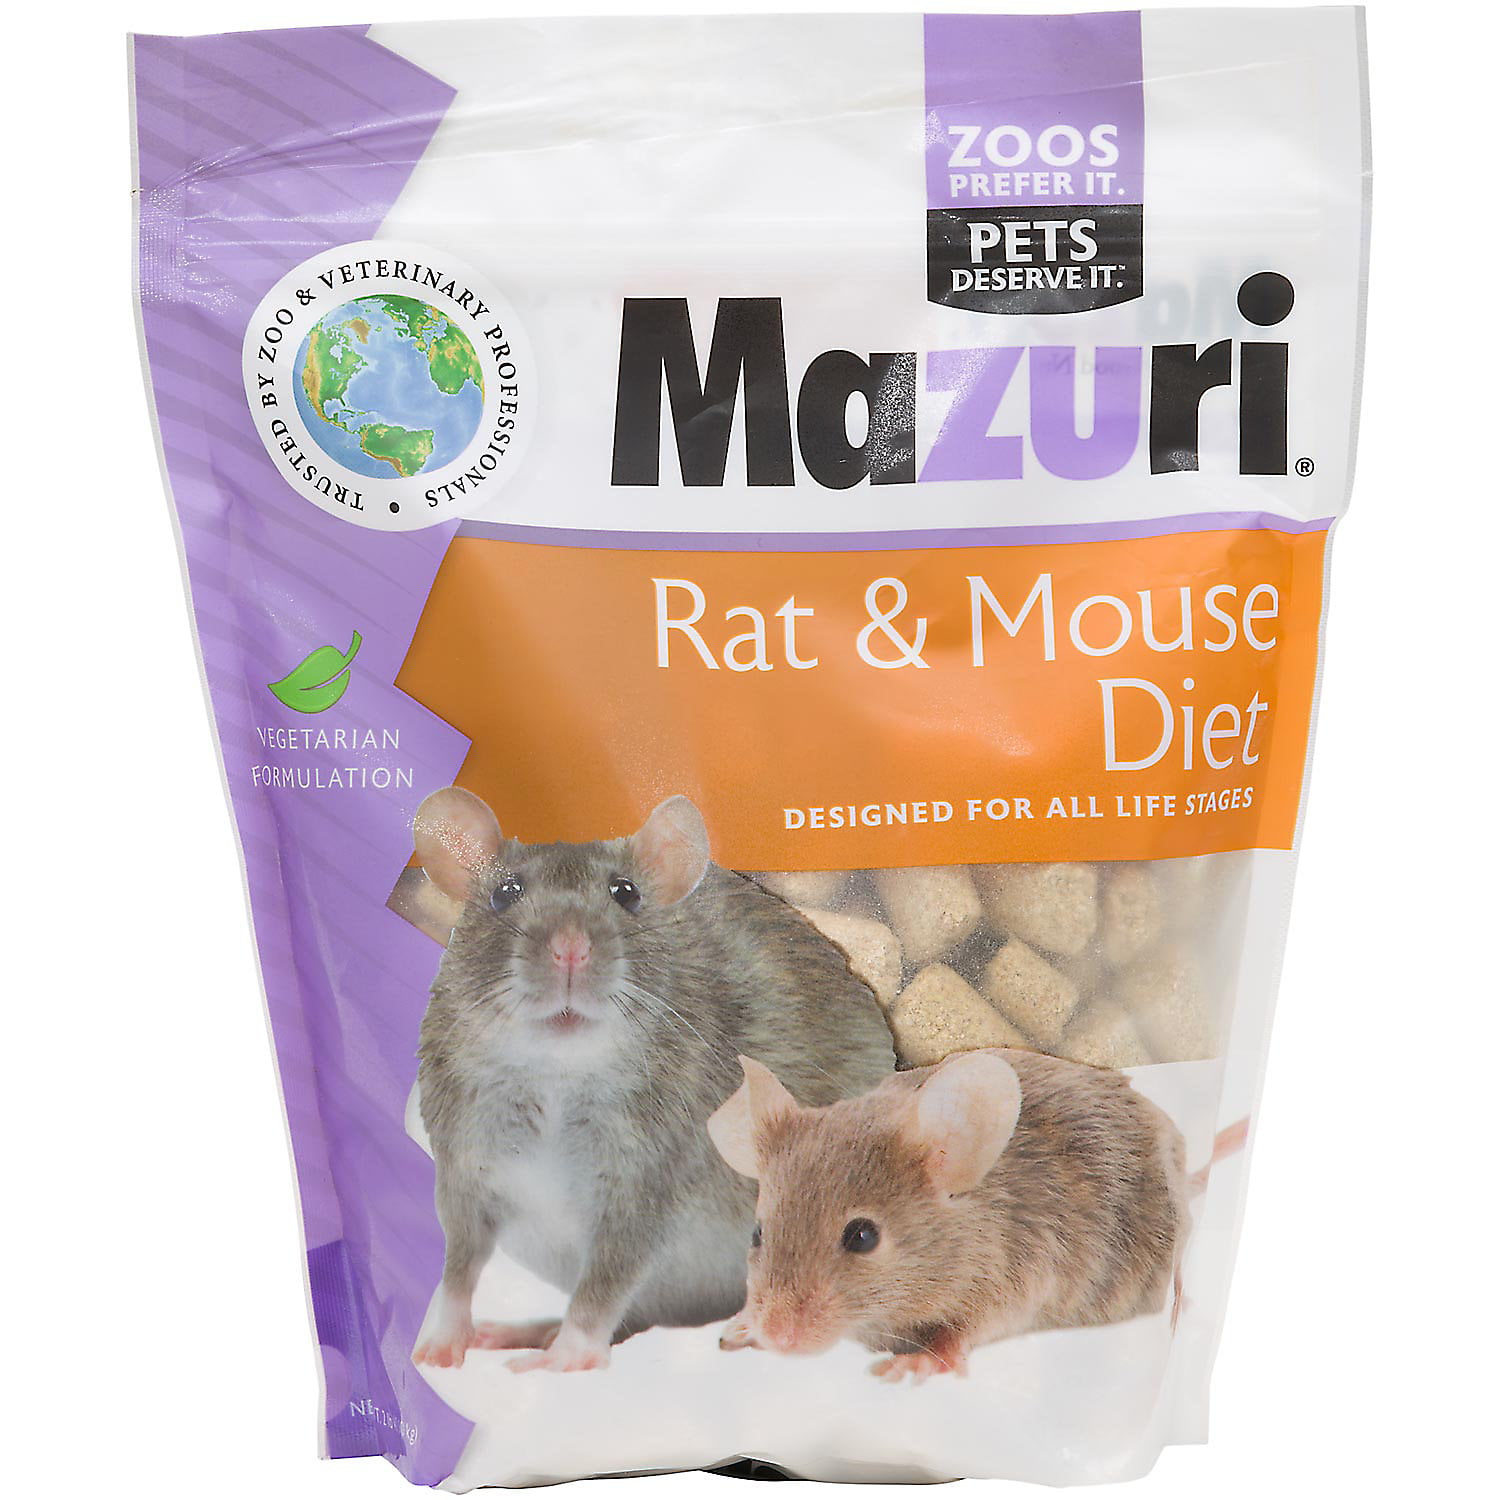 Mazuri Rat & Mouse Diet 2 lbs | For All Life Stages ...